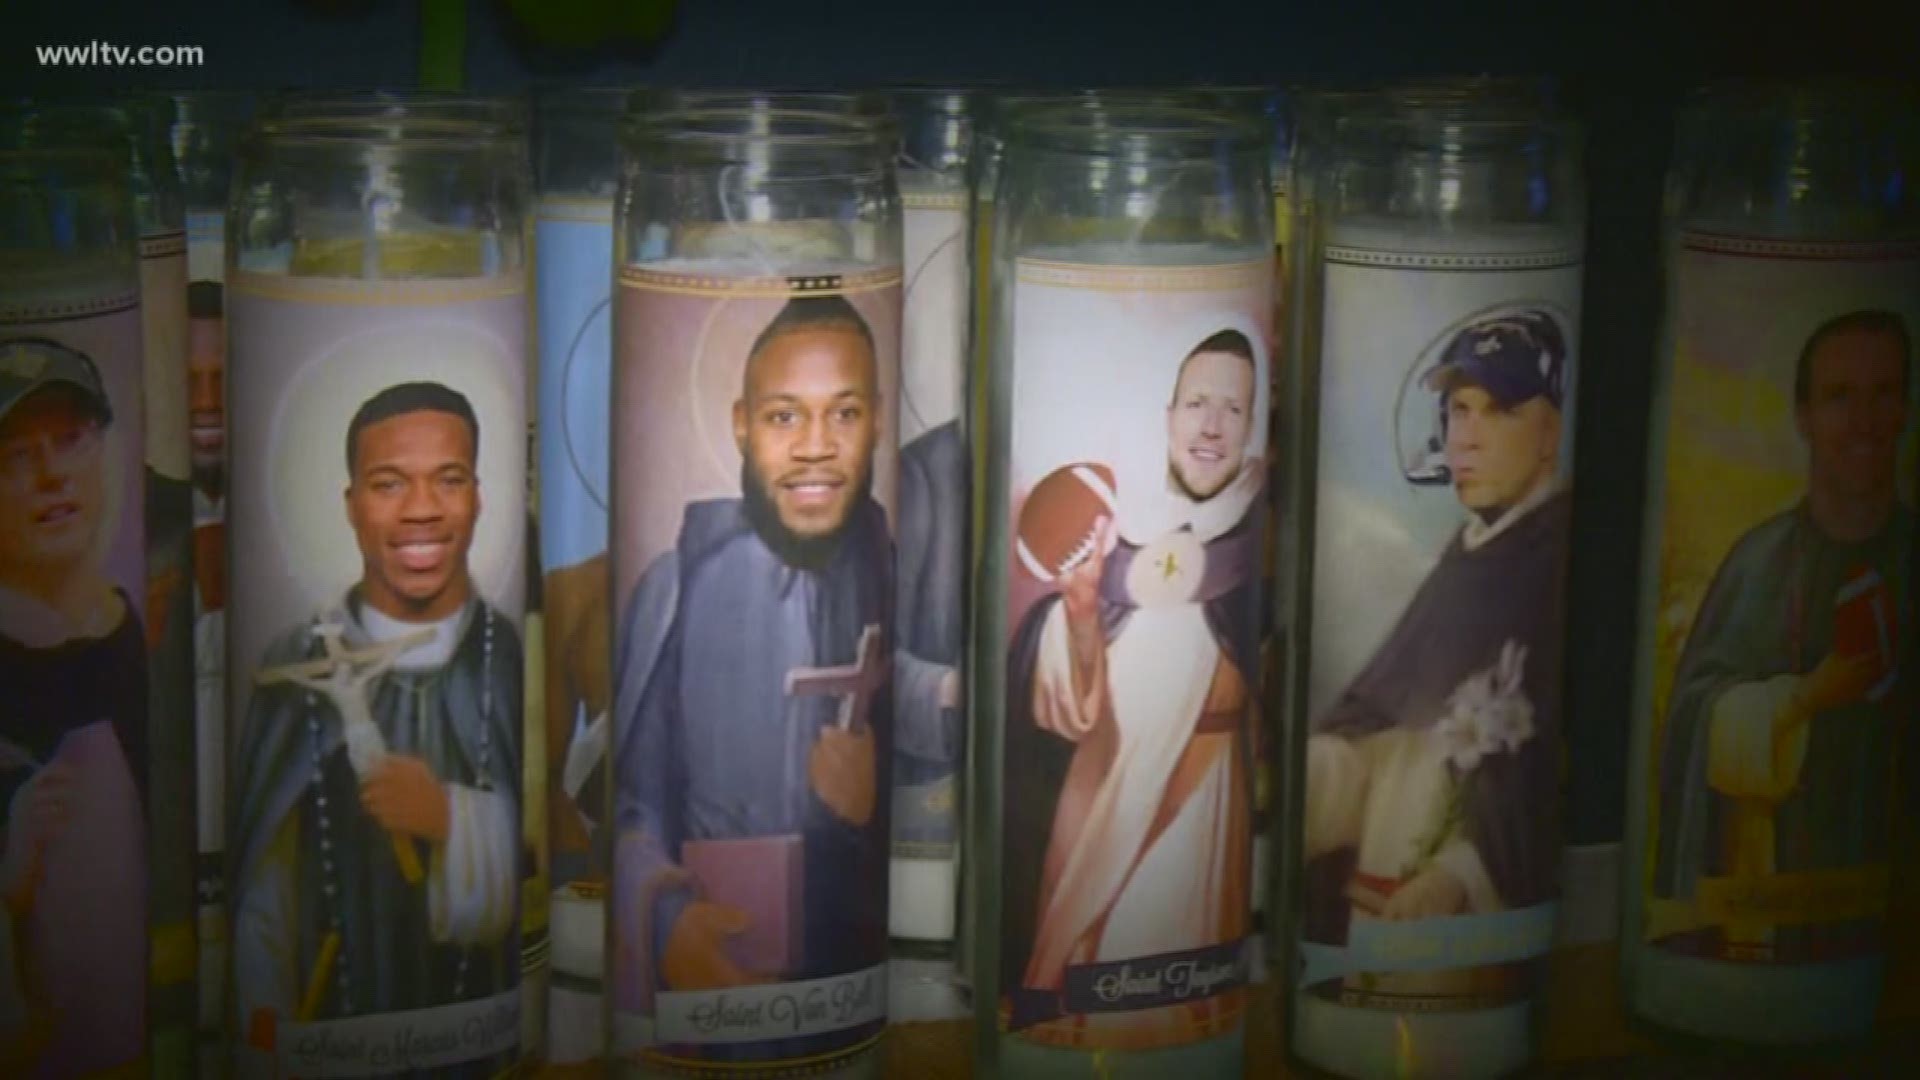 Customized Saints candles are still for sale.